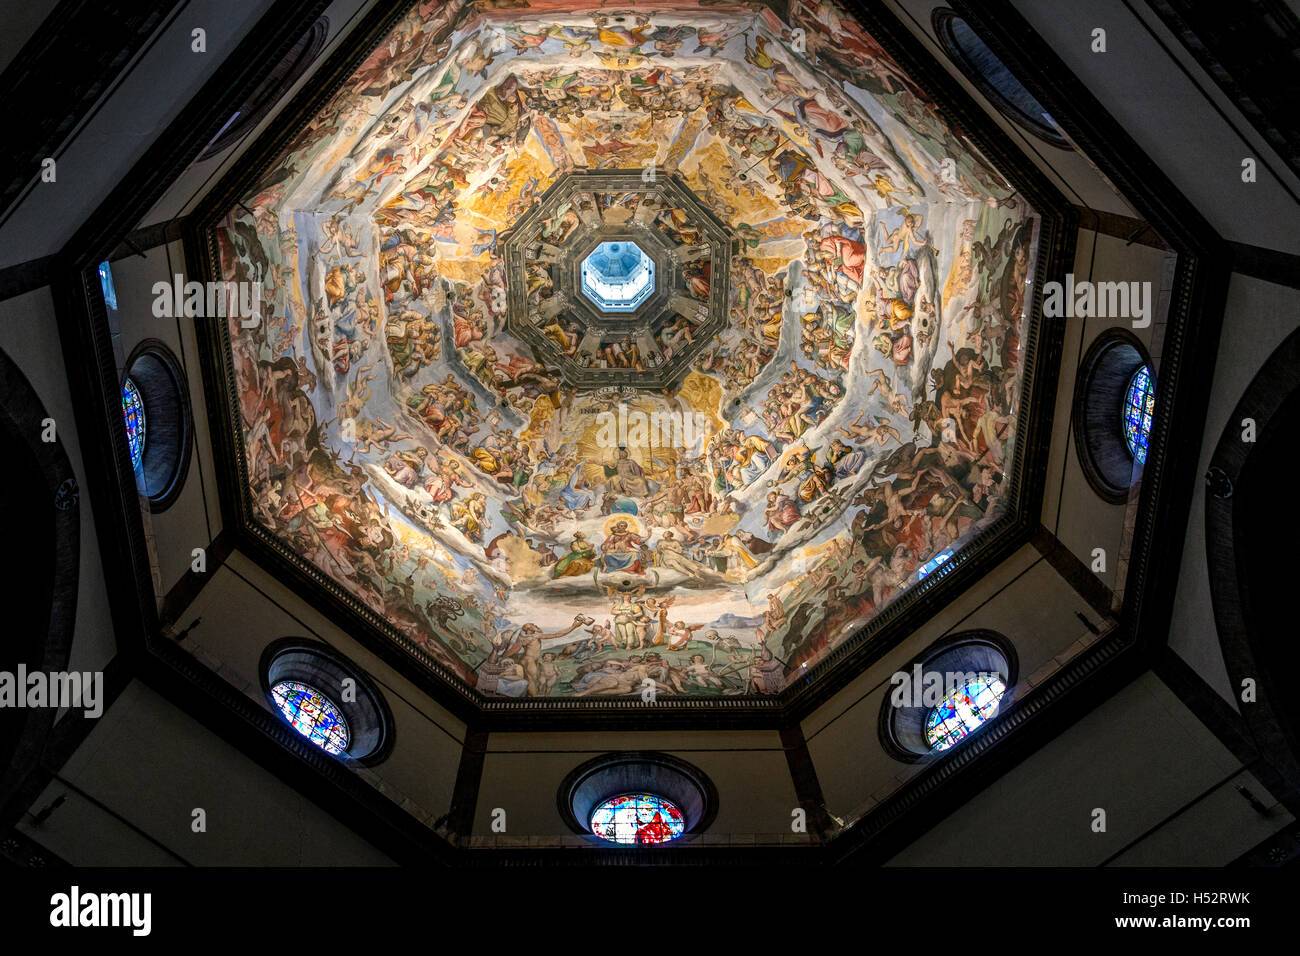 The interior of the cupola of the great dome of the Duomo (Cattedrale di Santa Maria del Fiore) in Florence, Italy Stock Photo